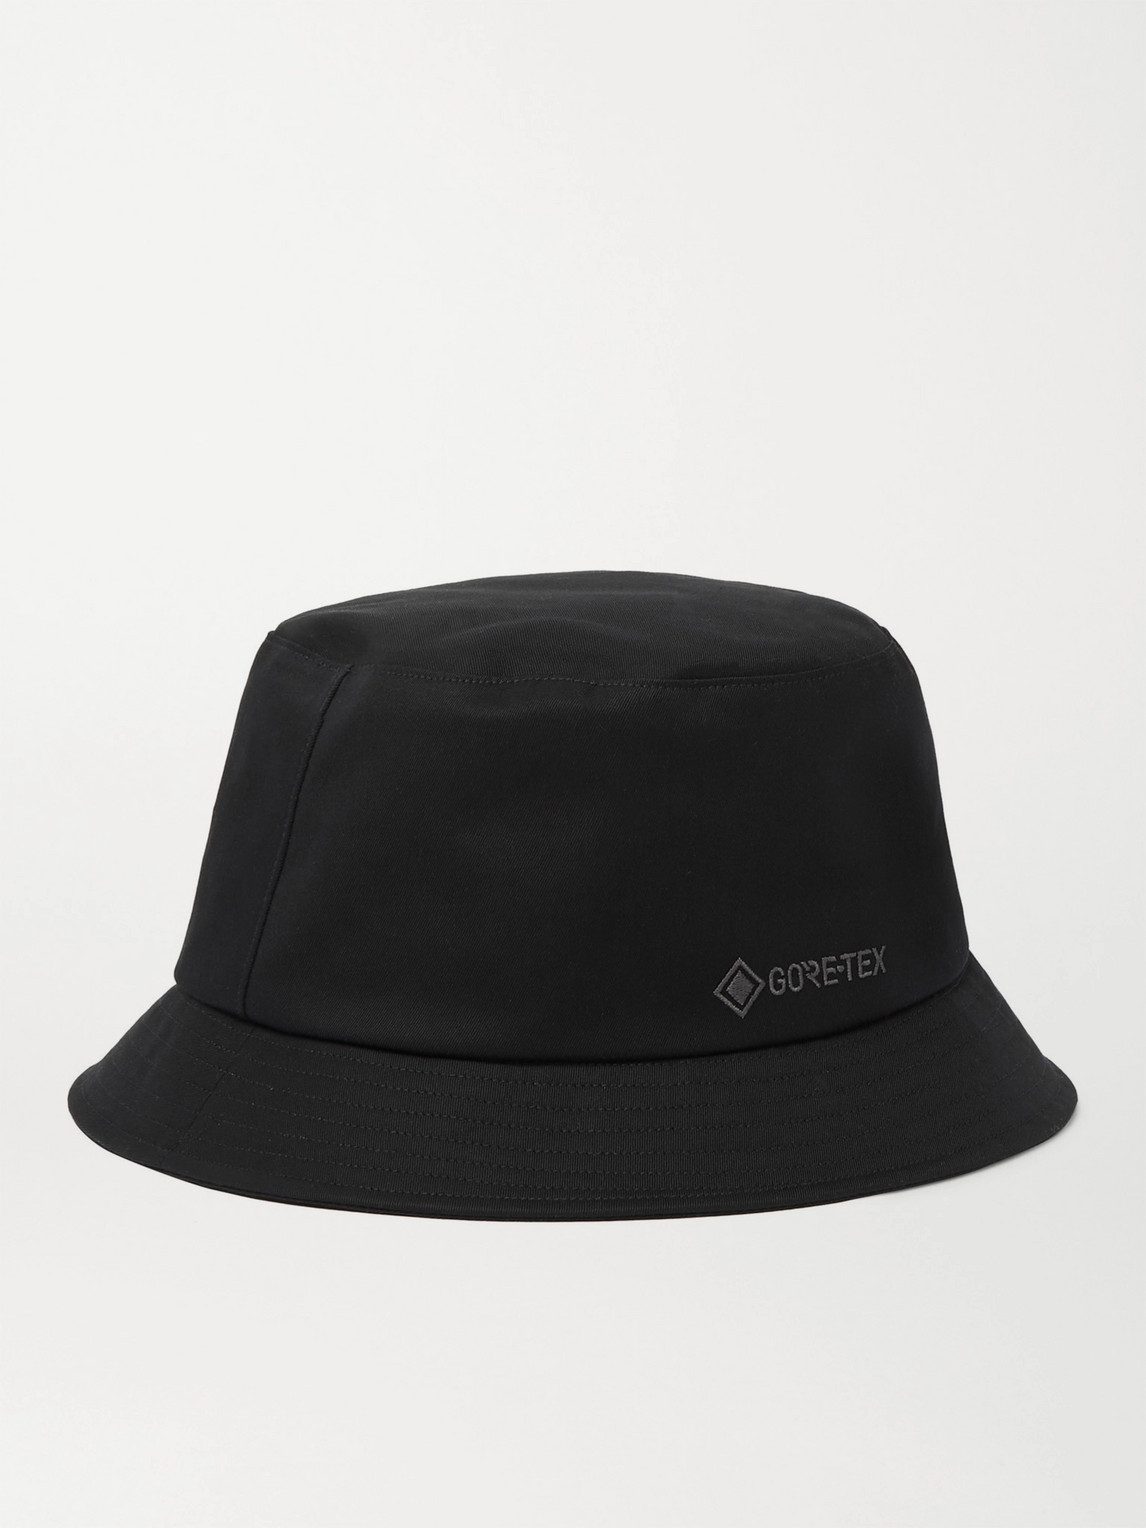 Nanamica Embroidered GORE-TEX Bucket Hat in Black | Stylemi